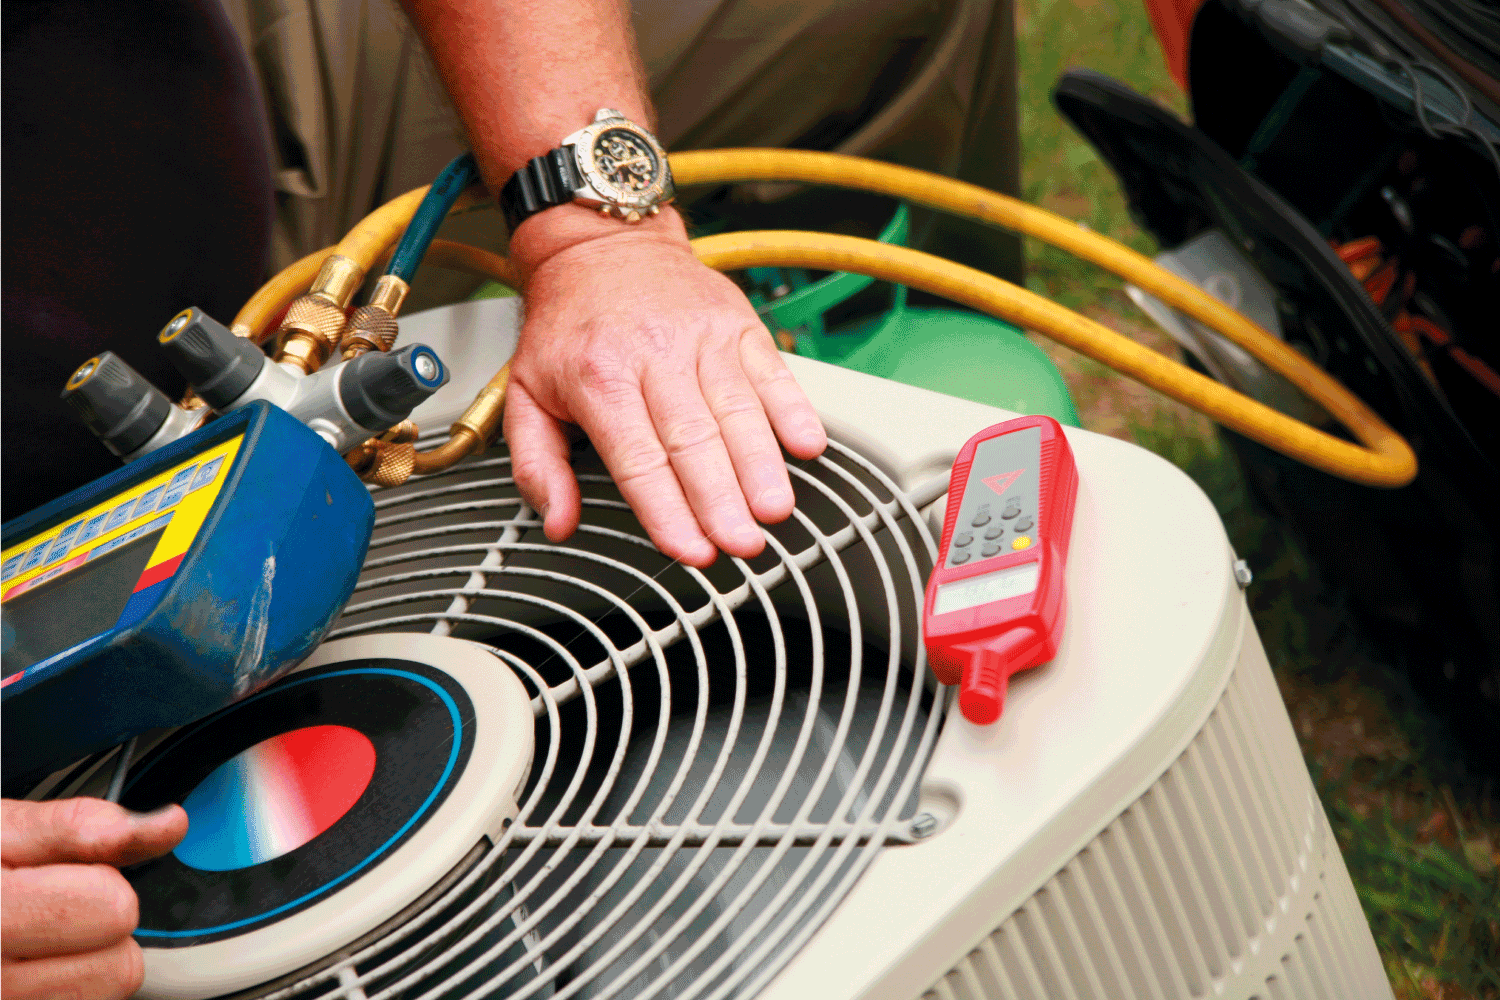 air conditioner service technician with gadgets repairing device